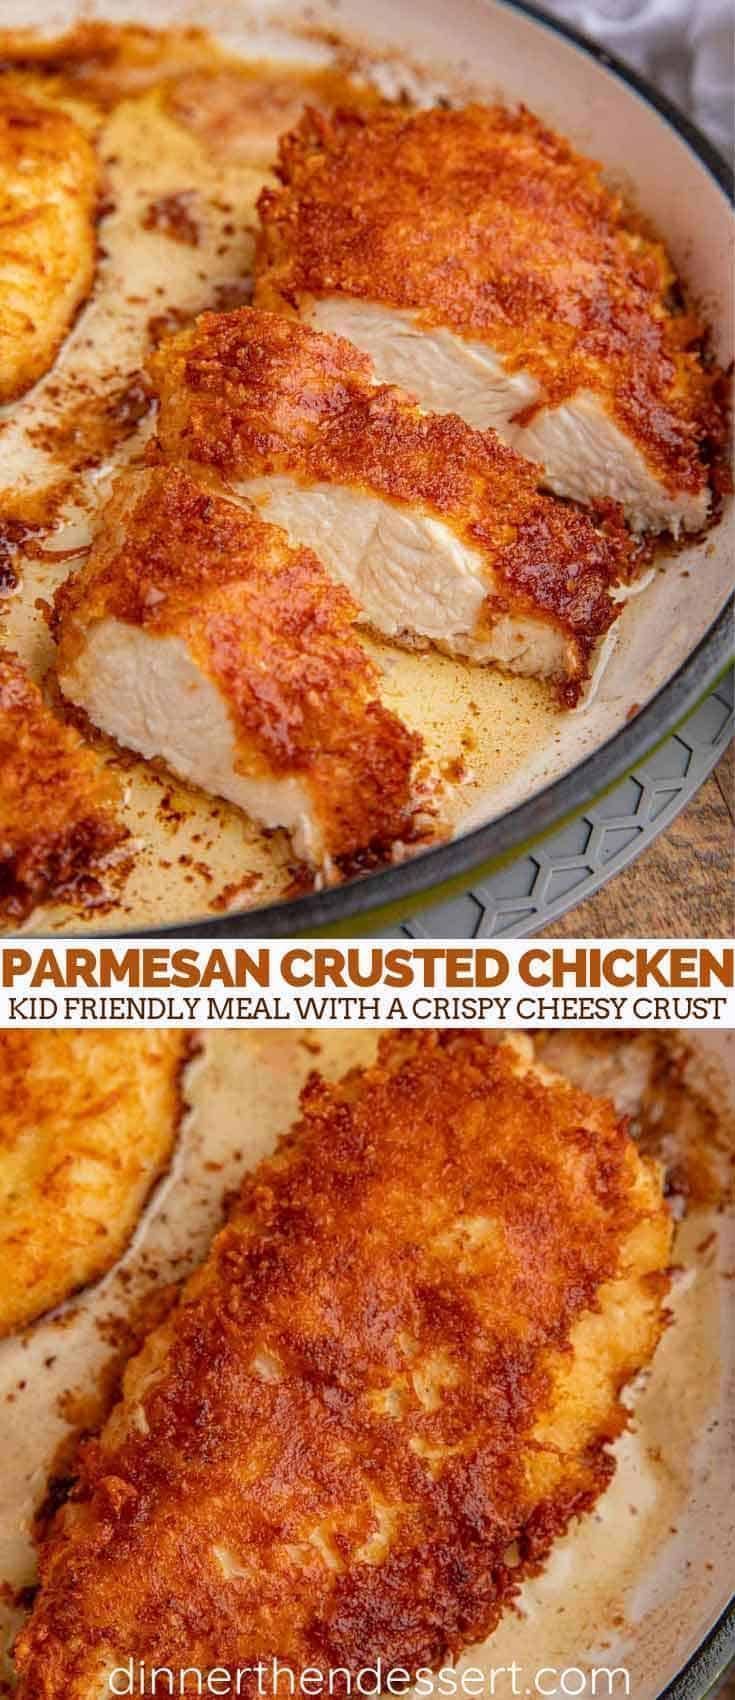 Ultimate Parmesan Crusted Chicken (5 mins prep!) - Dinner, then Dessert -   19 dinner recipes for family ideas